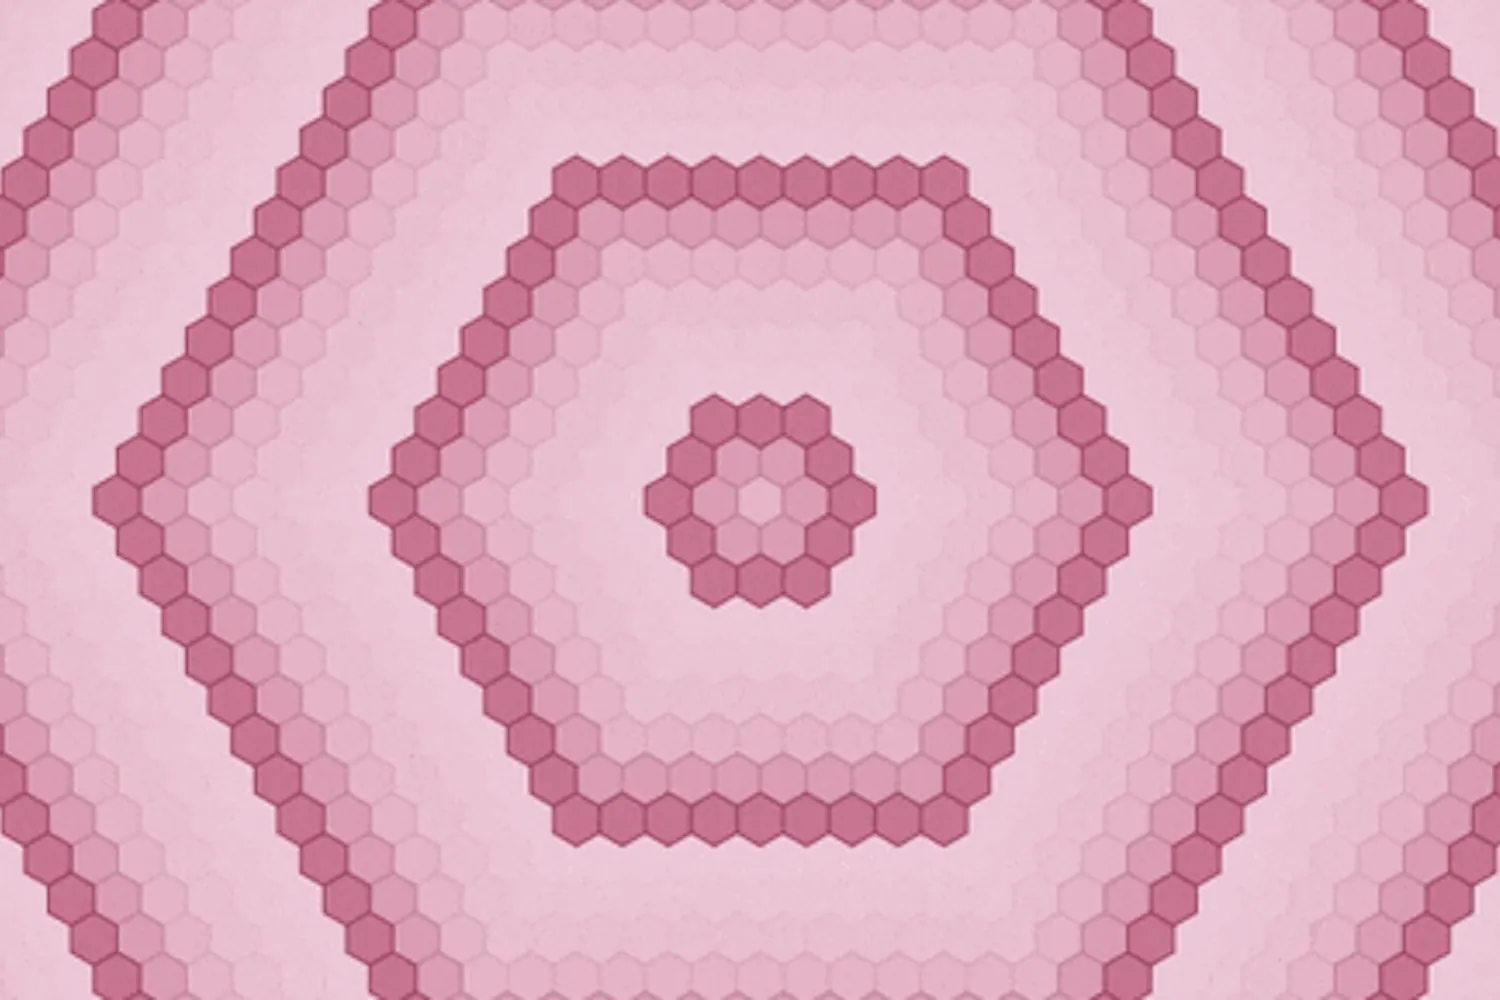 A hexagonal grid with pink rings eminating from the center. Each pink ring is followed by pink rings of a lighter color